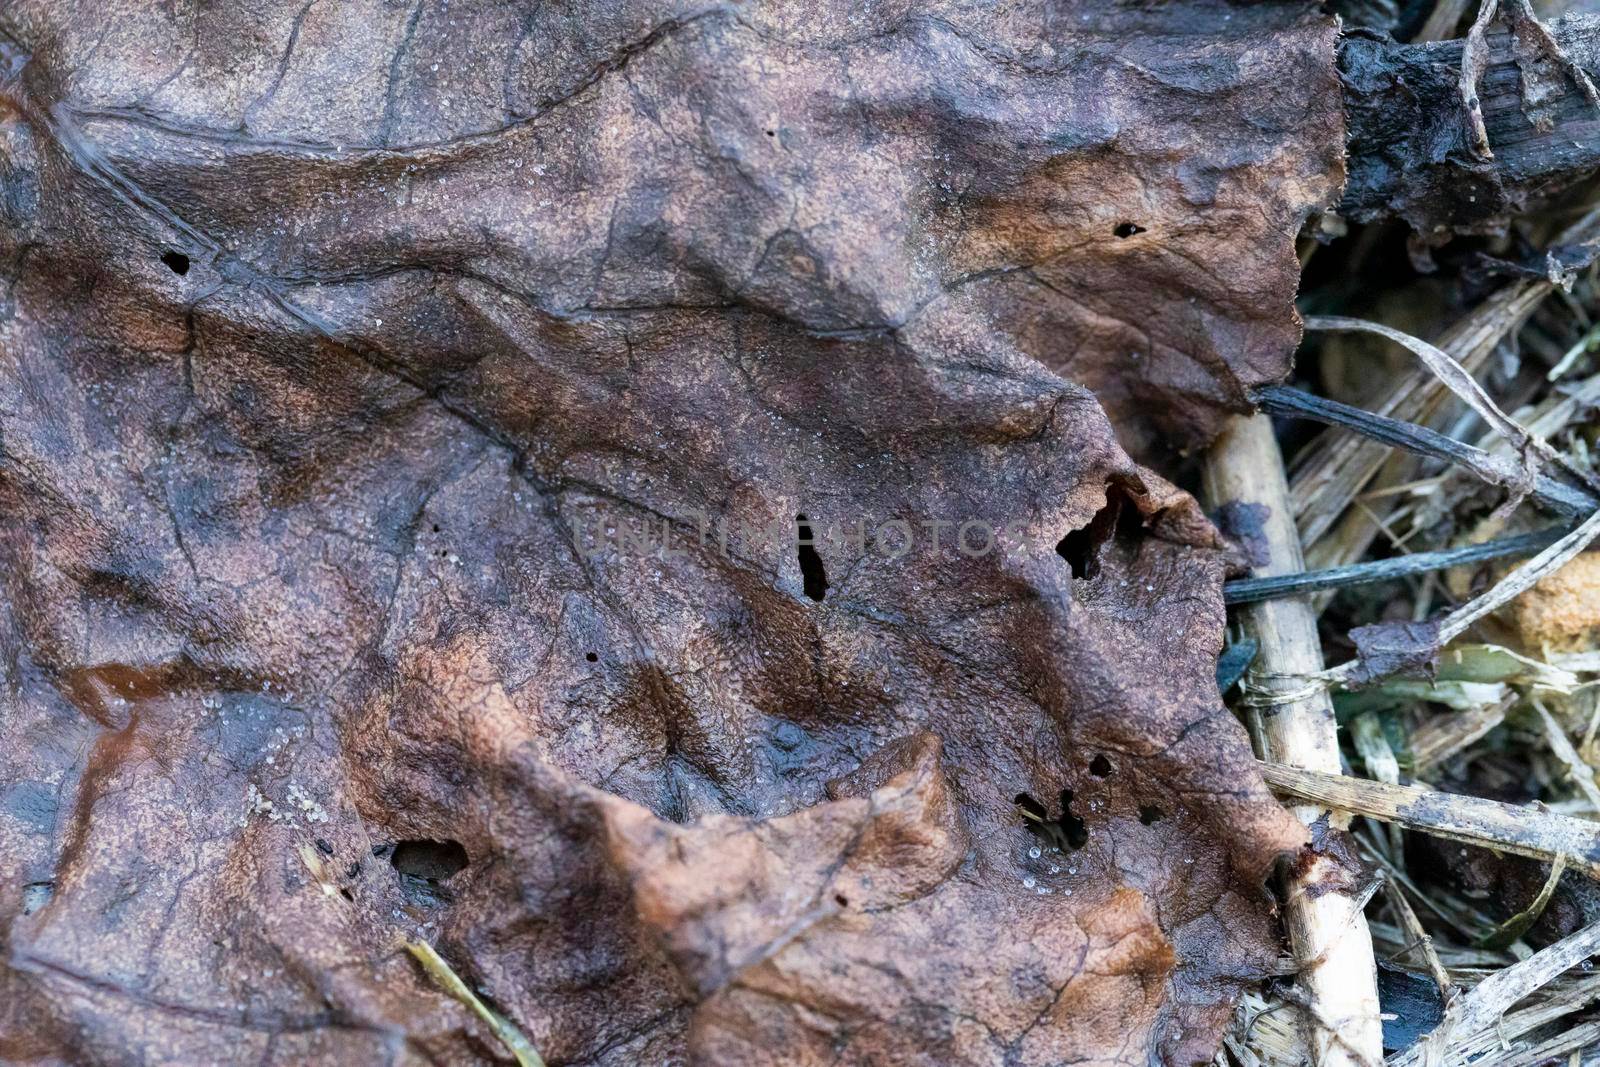 A large brown leaf lying on the ground with holes where it has been eaten by an insect